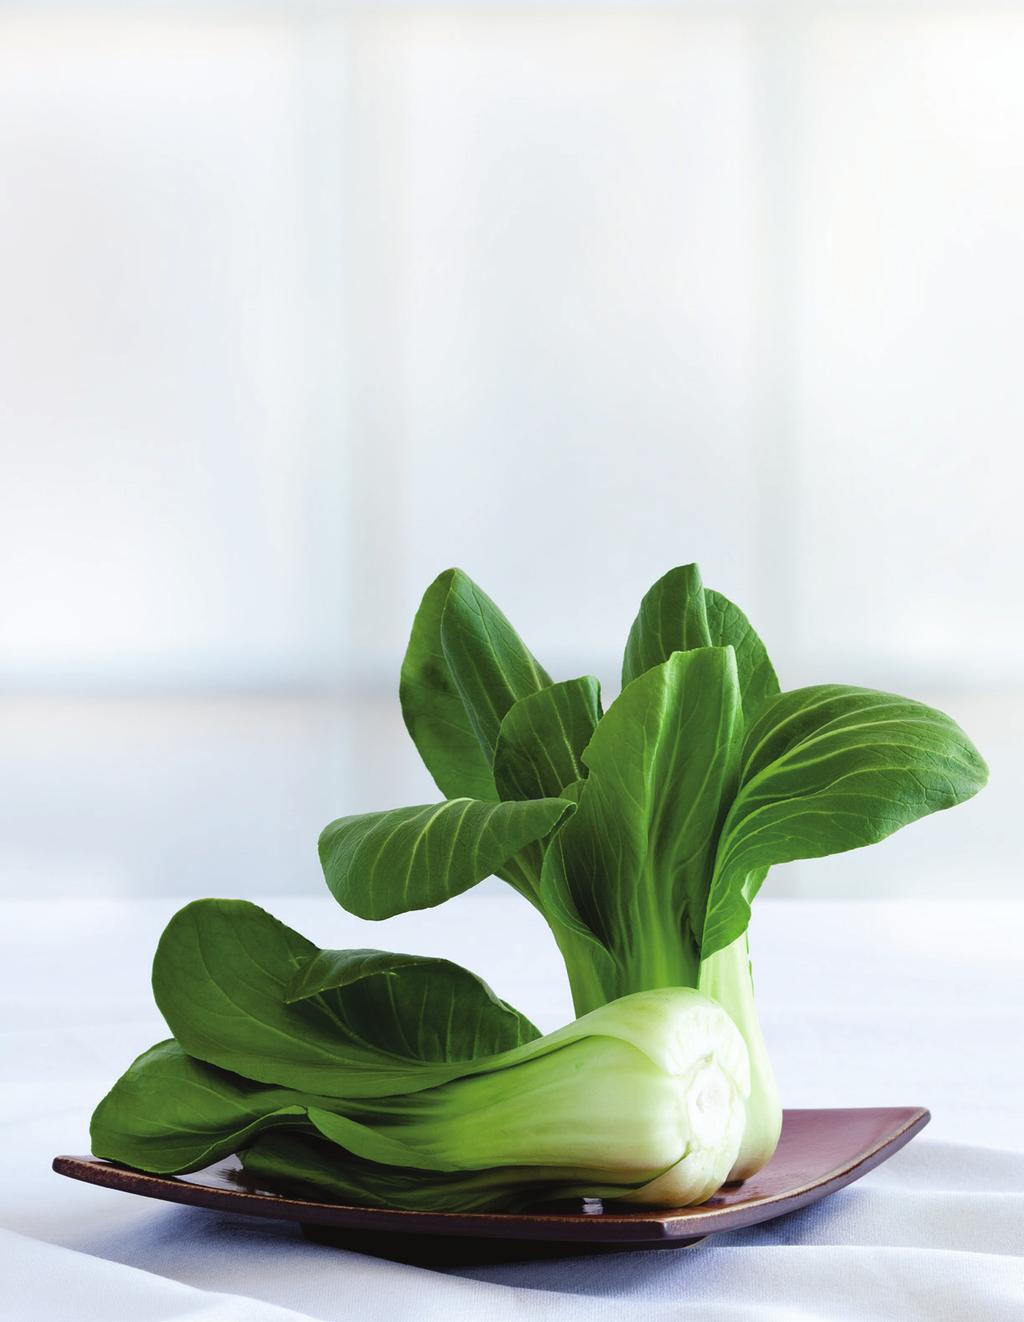 Bok Choy The Unassuming Exotic With crunchy stalks, tender leaves and gorgeous color, bok choy is elegant and extraordinarily nutritious.